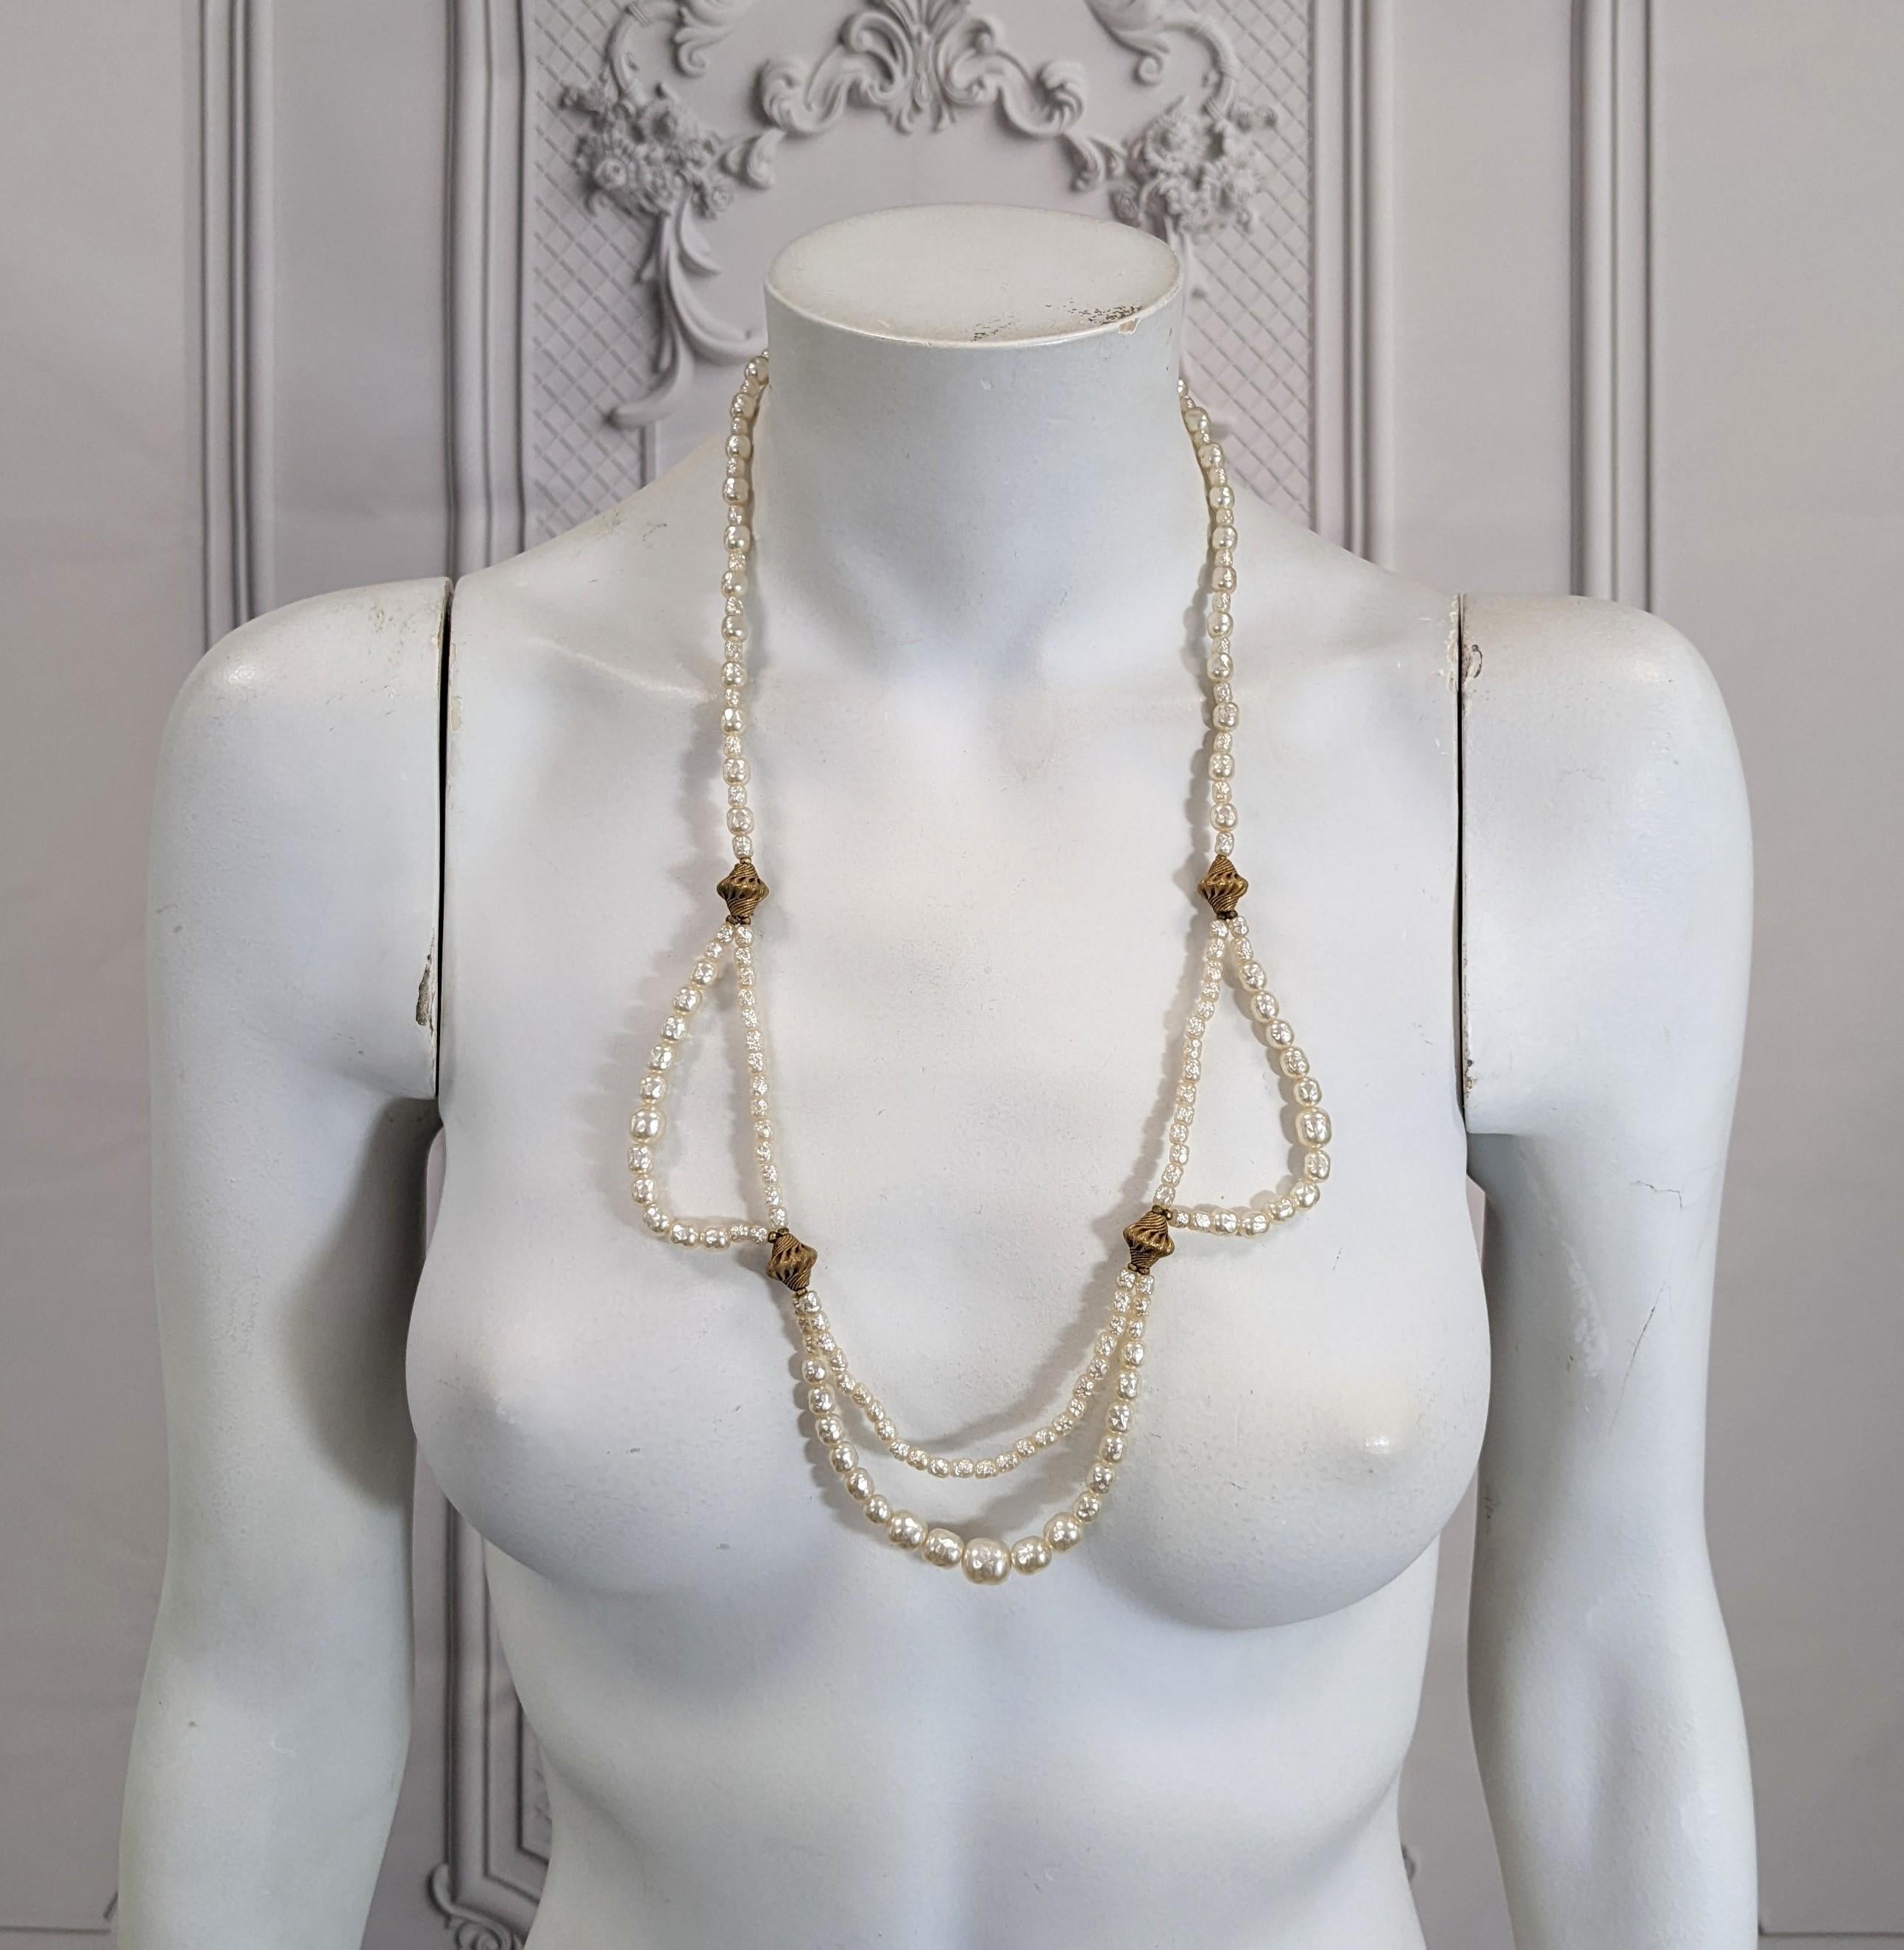 Women's Miriam Haskell Pearl and Gilt Necklace For Sale